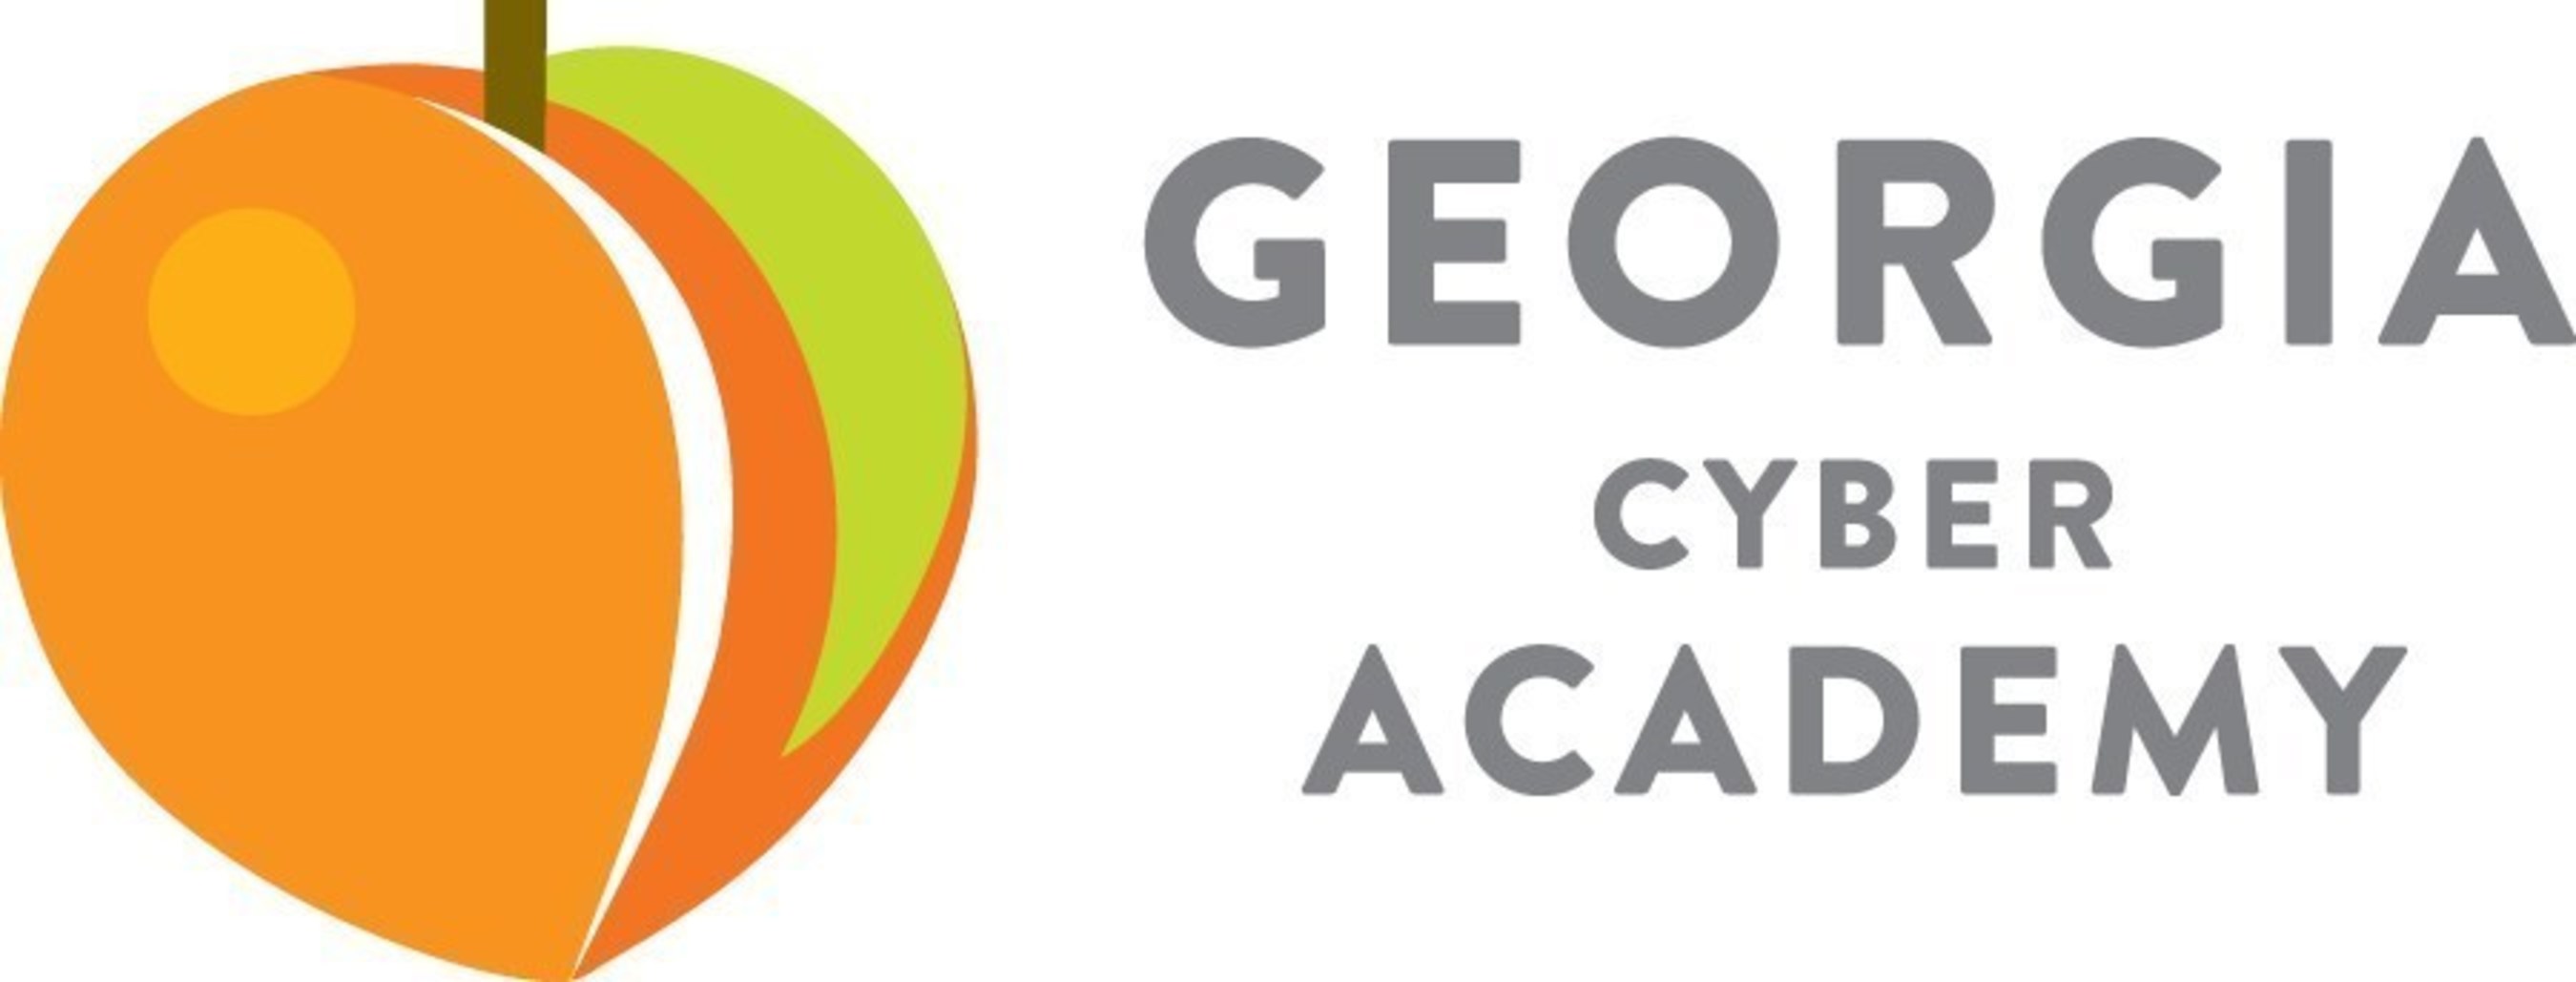 georgia-cyber-academy-now-accepting-enrollment-for-students-seeking-online-education-in-2016